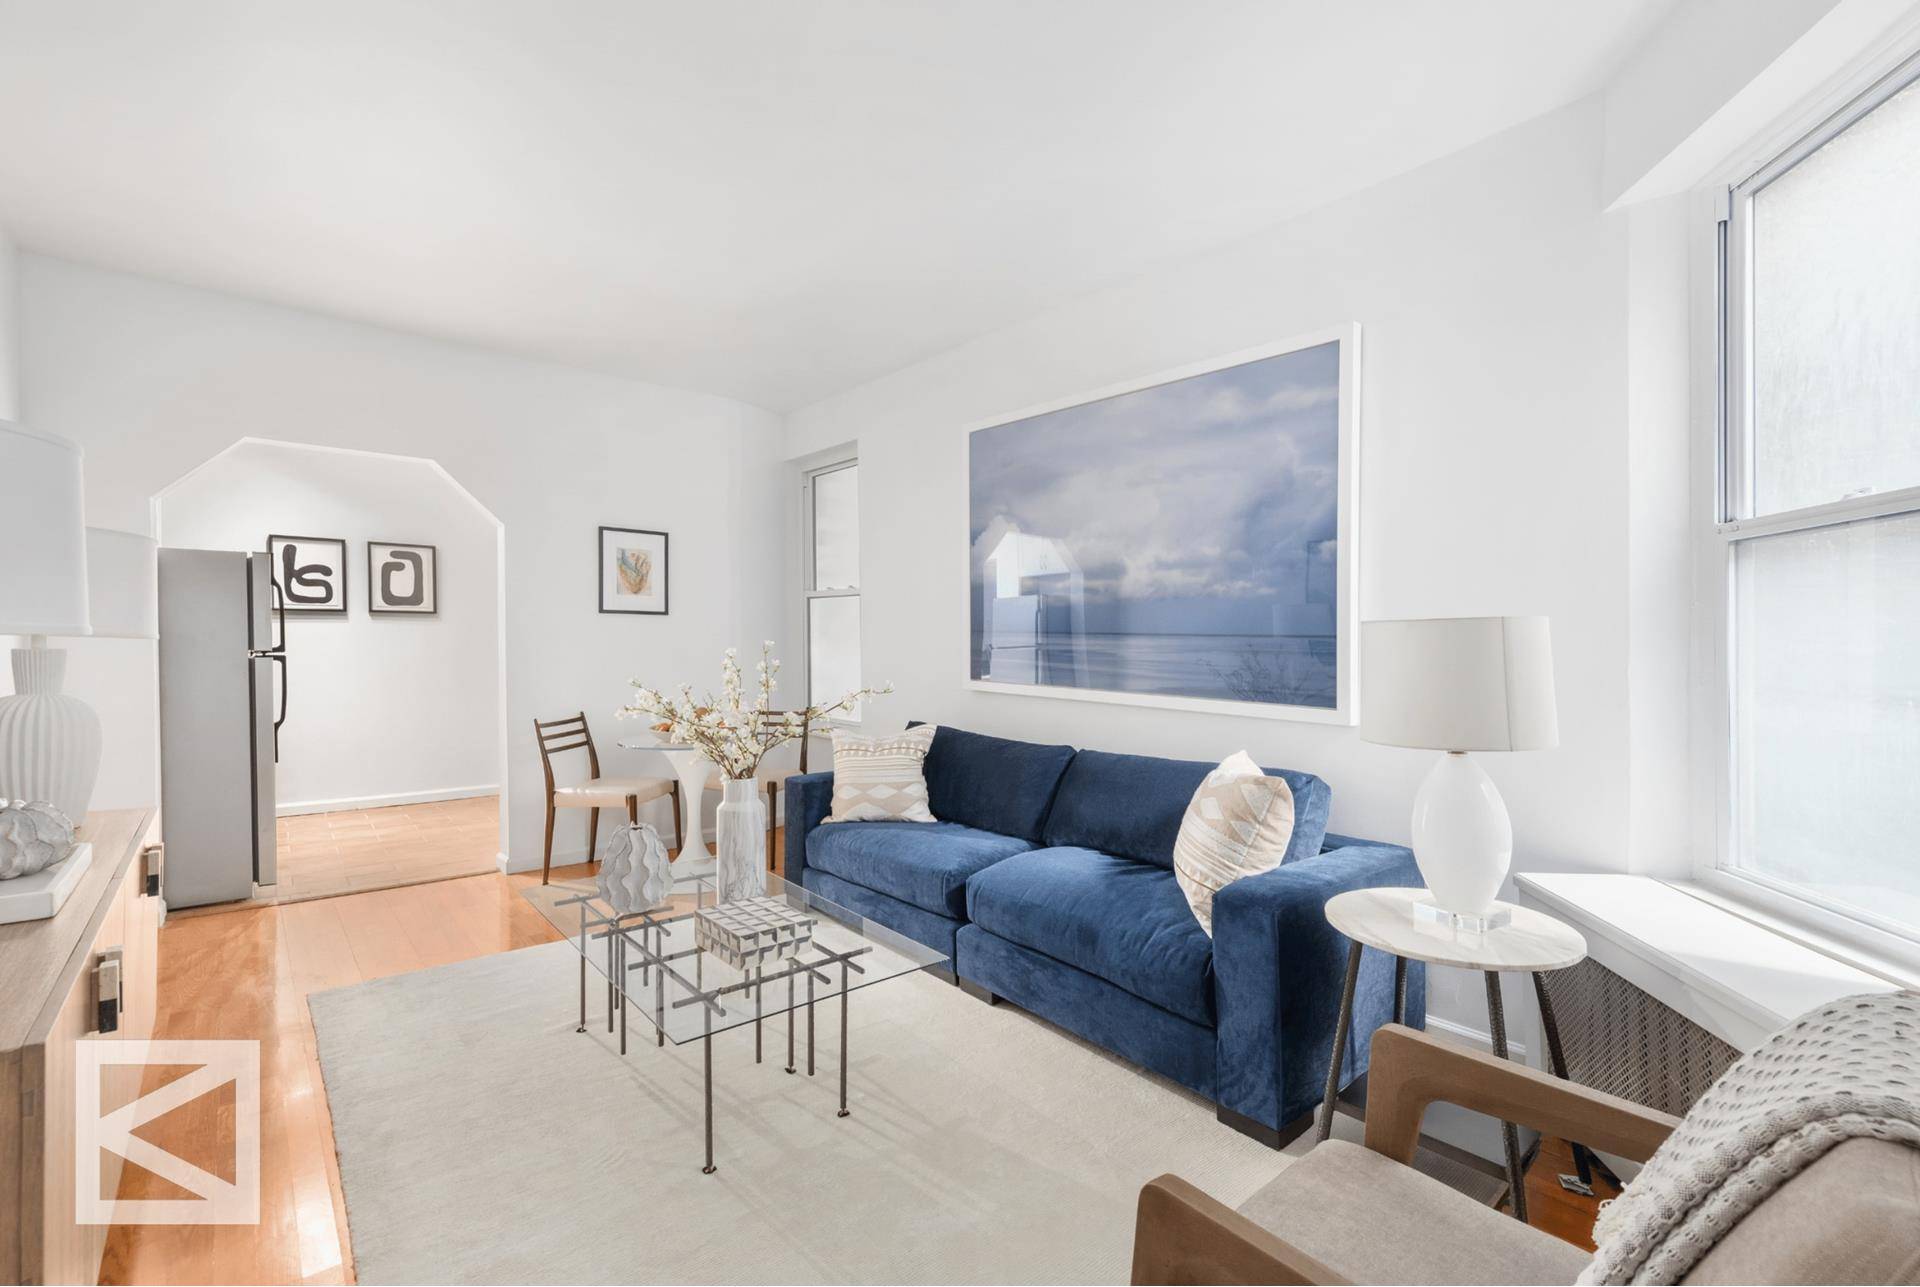 Situated on a bucolic block of downtown's coveted Kips Bay, this boutique co op offers a charming pre war building with an artful lobby and beautiful decorative fireplace.